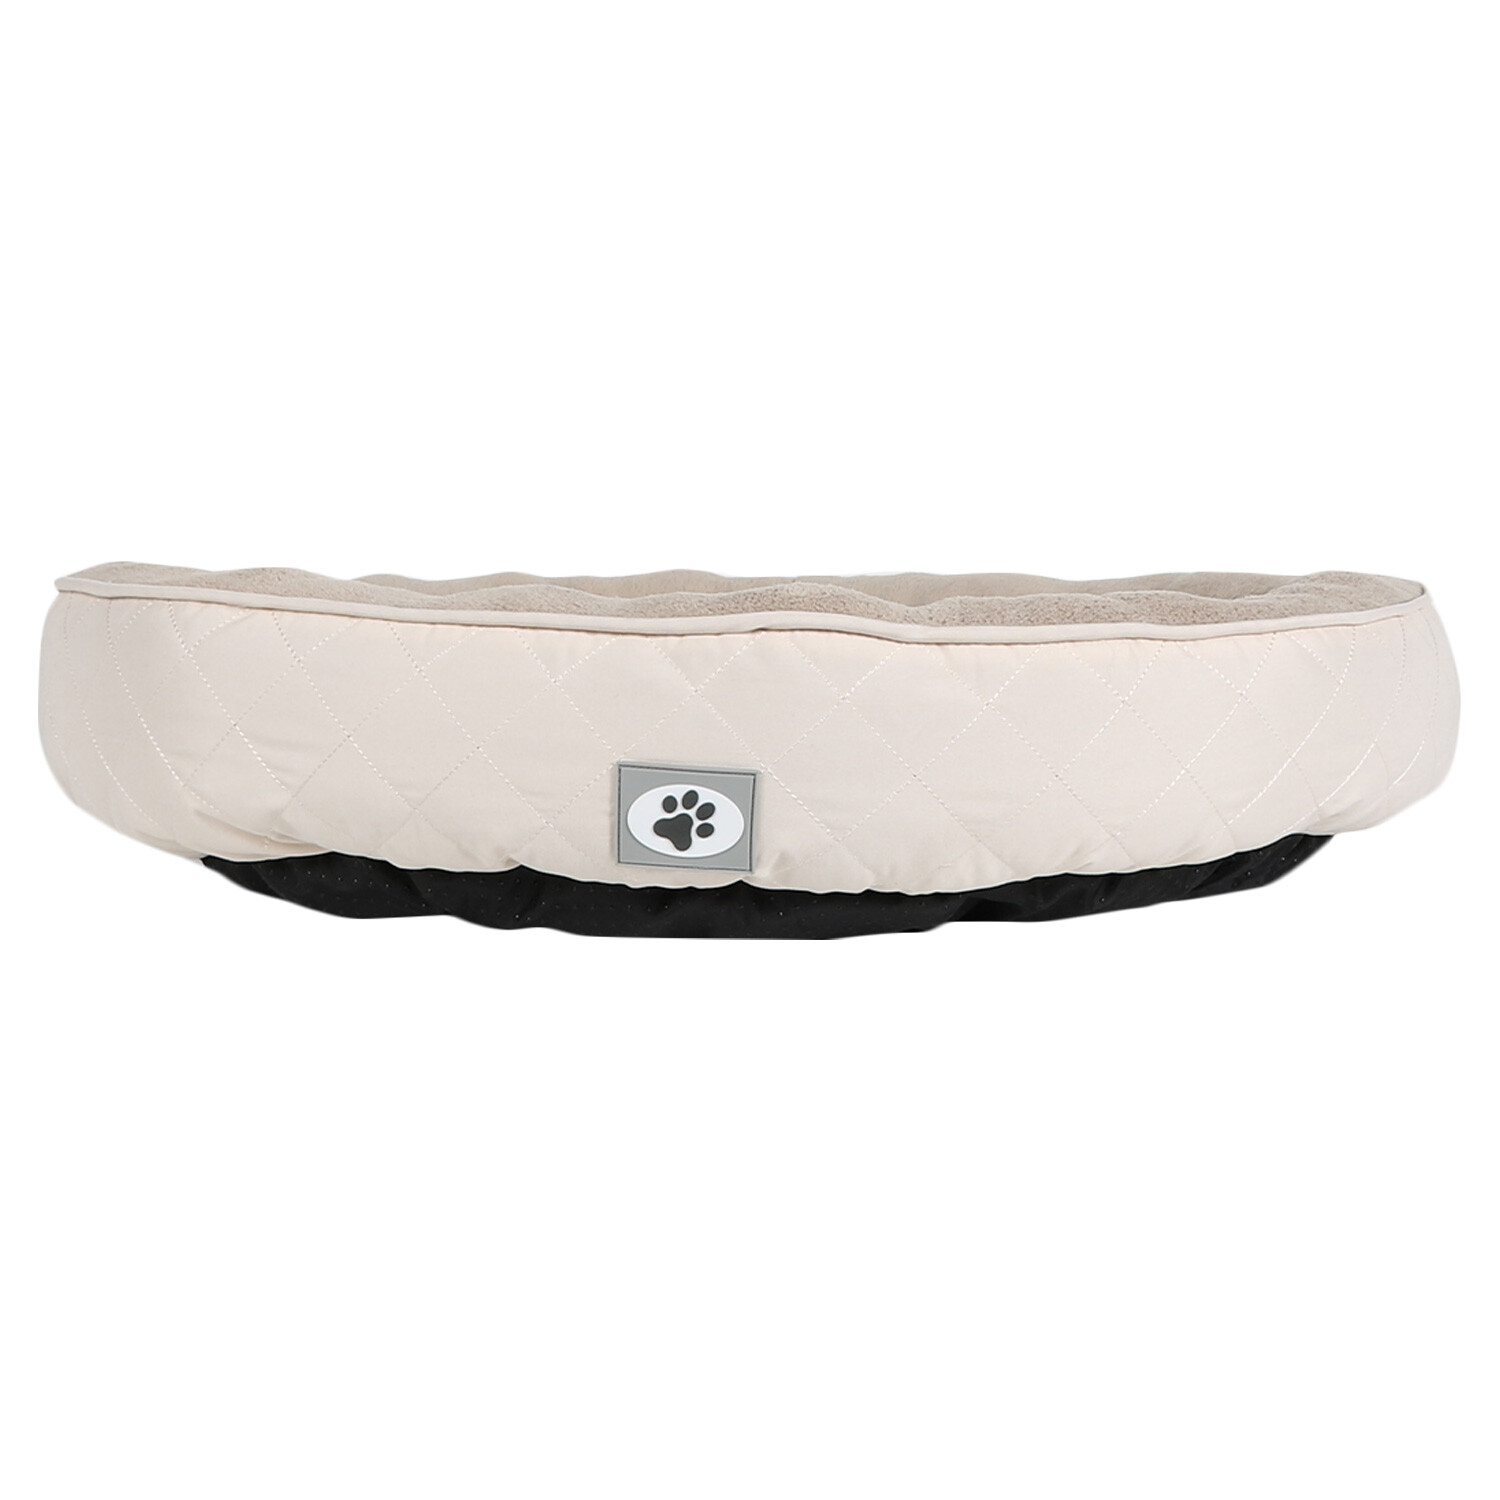 Snuggle Round Pet Bed Image 6